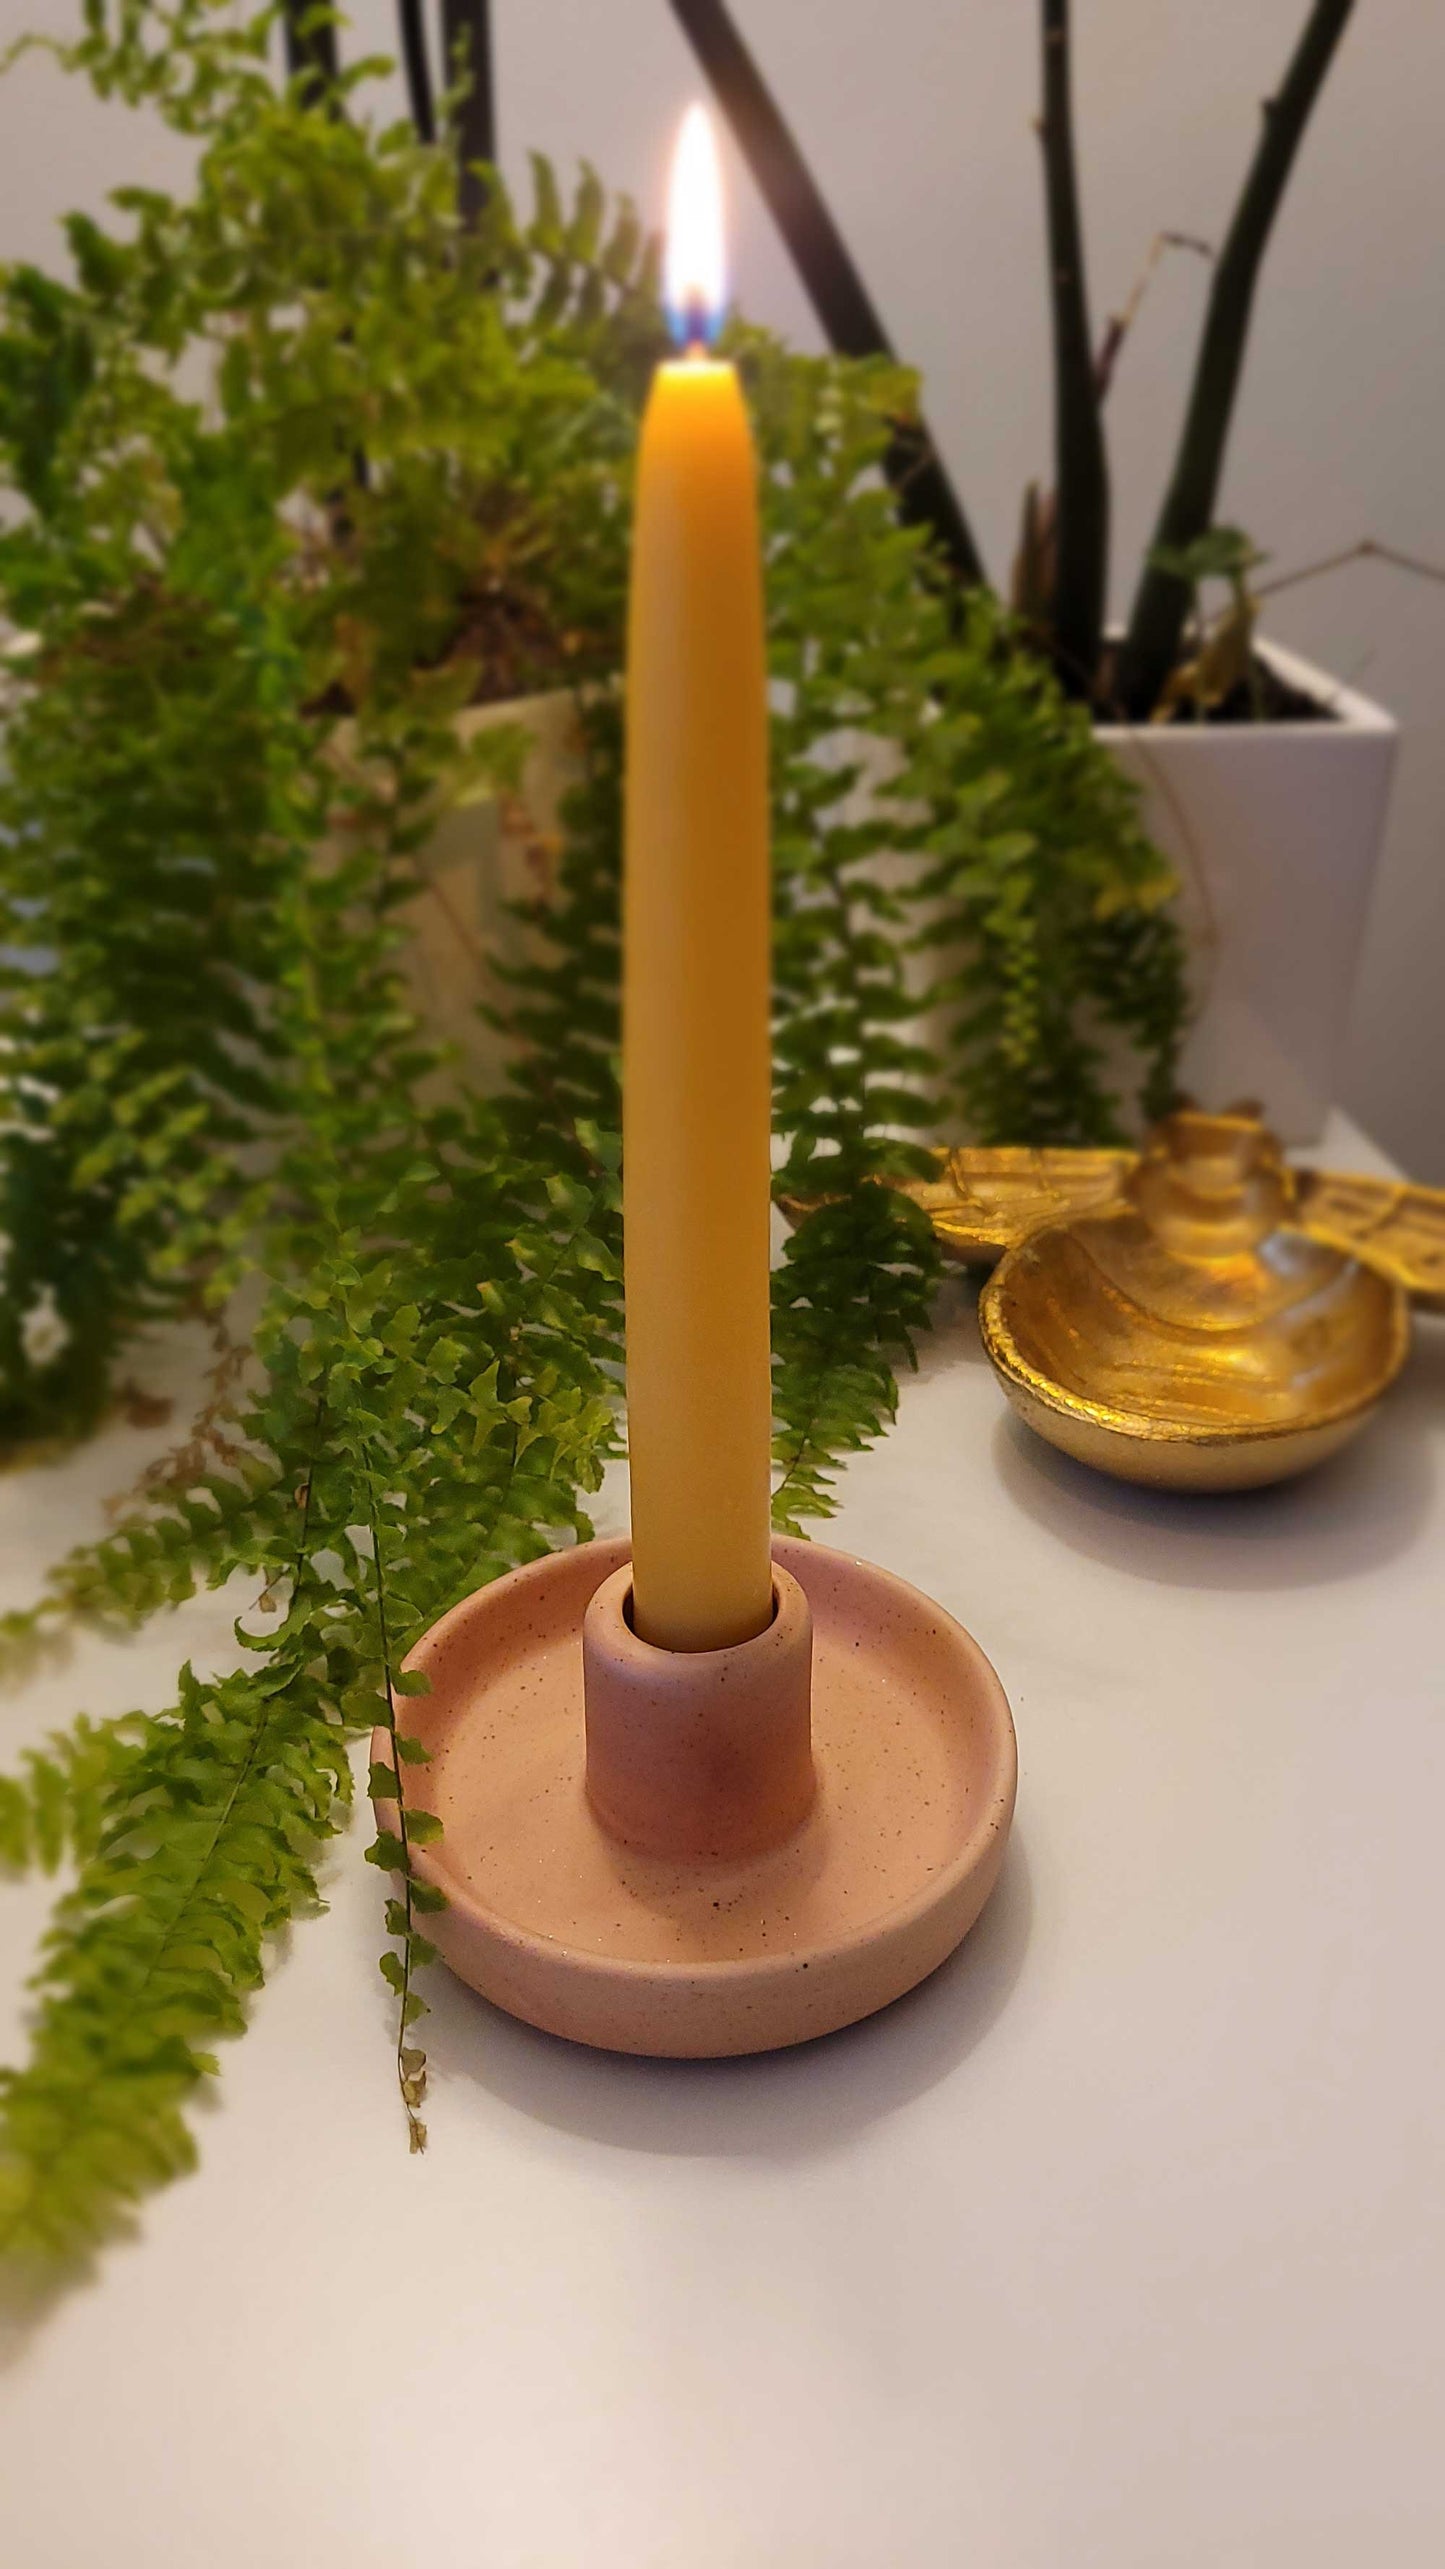 Nordic - Hygge style Ceramic Candlestick Holder